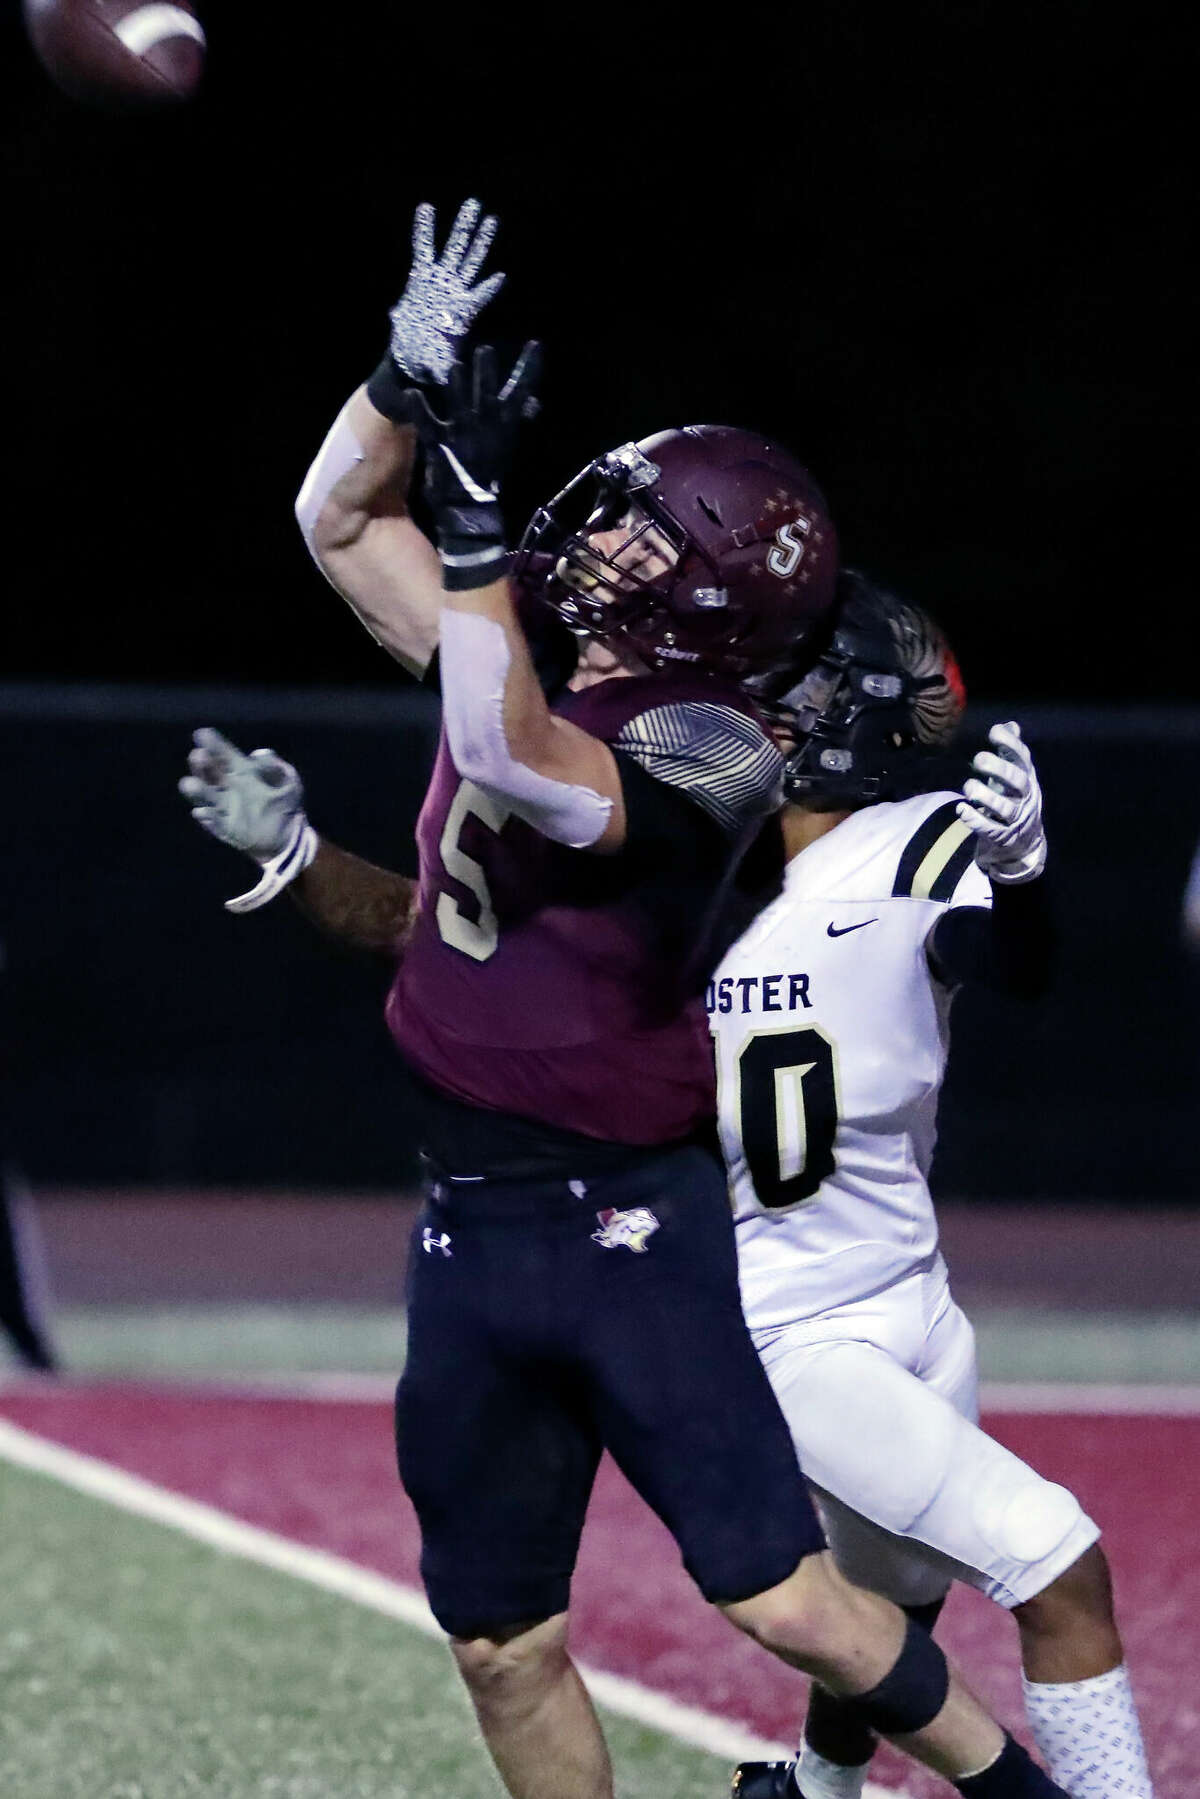 Magnolia West defensive back Jackson Blank goes up in front of Foster receiver Dylan Apponey to intercept the ball during the first half of their District 10-5A high school football game Friday, Sept. 30, 2022 in Magnolia TX.